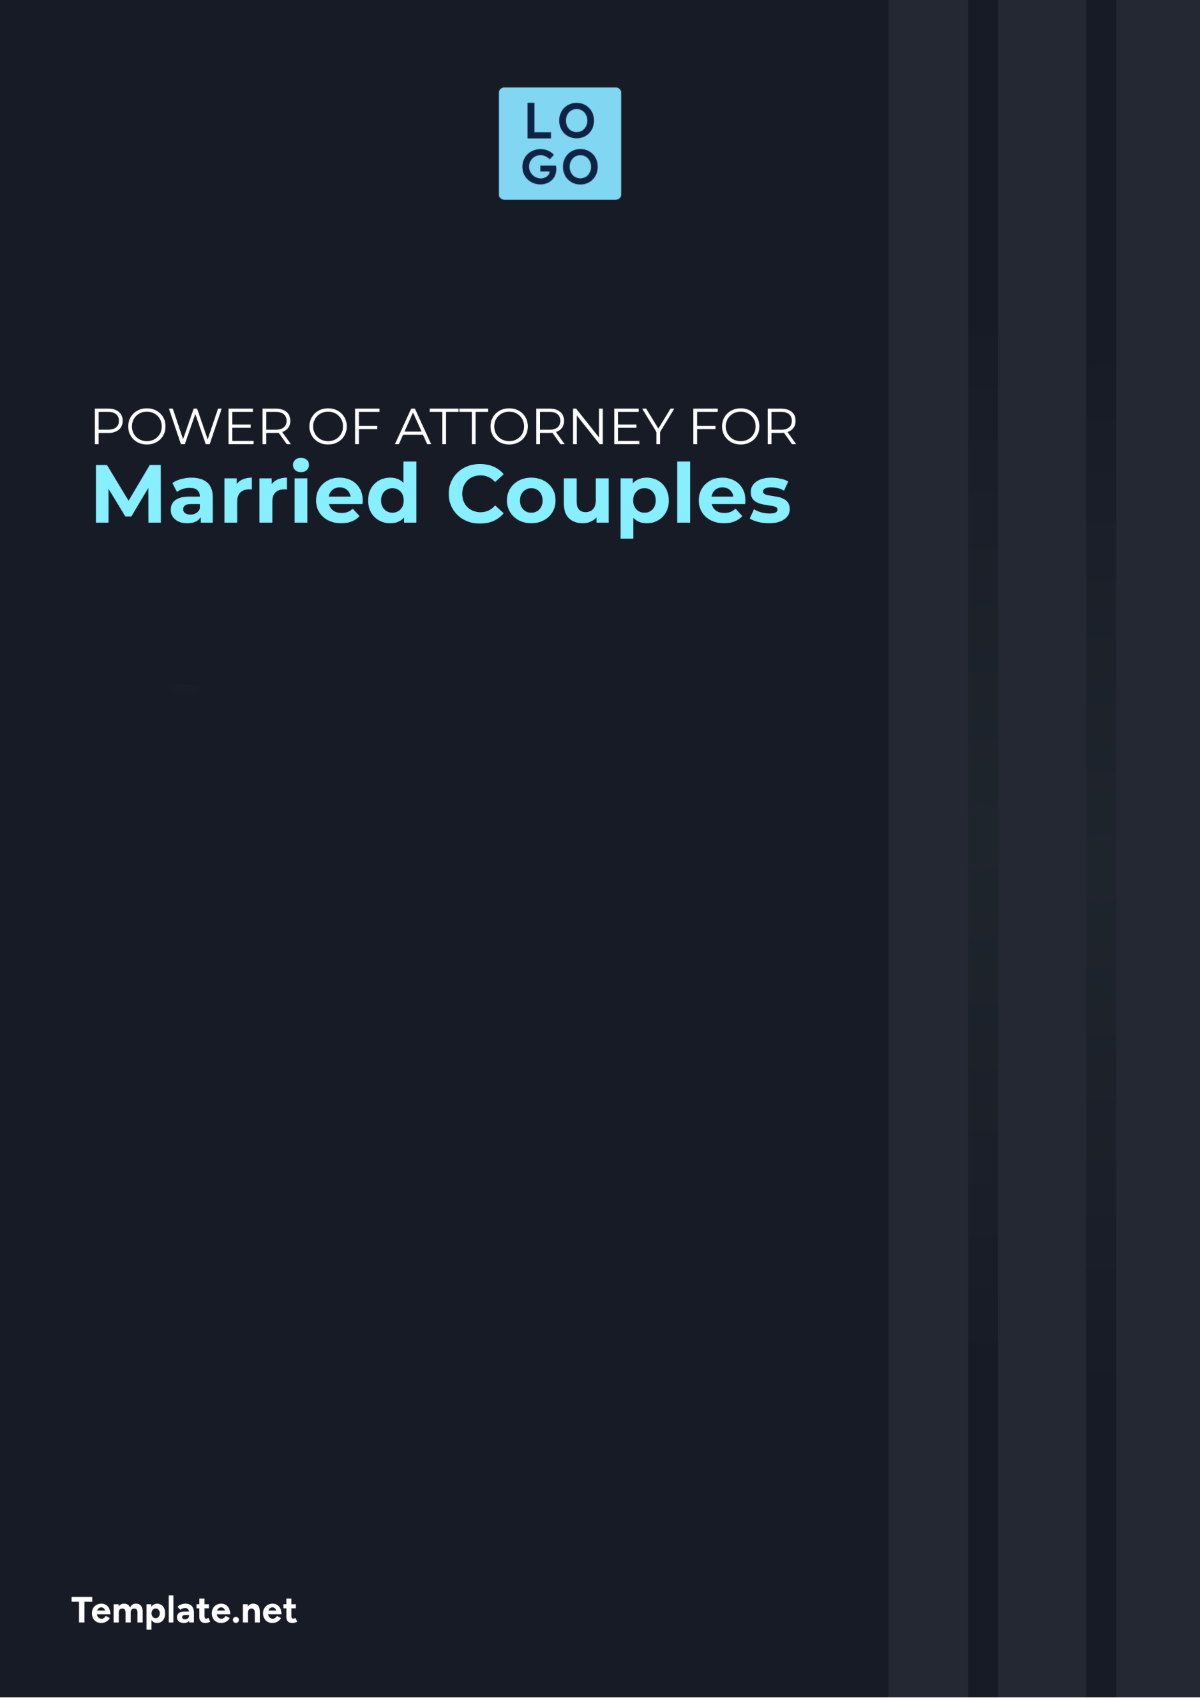 Power of Attorney For Married Couples Template